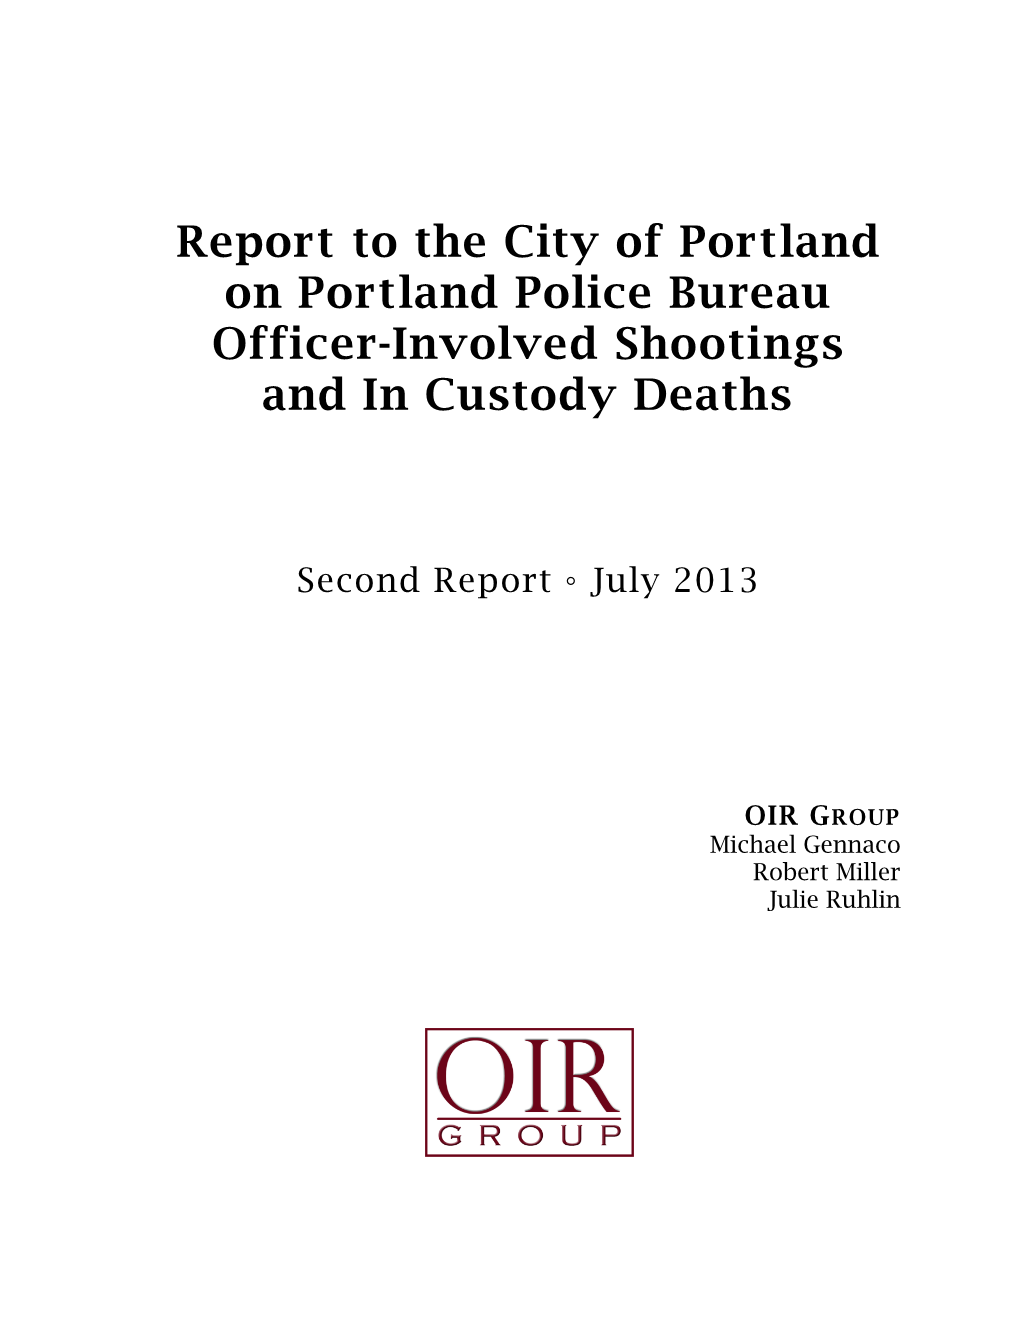 Report to the City of Portland on Portland Police Bureau Officer-Involved Shootings and in Custody Deaths